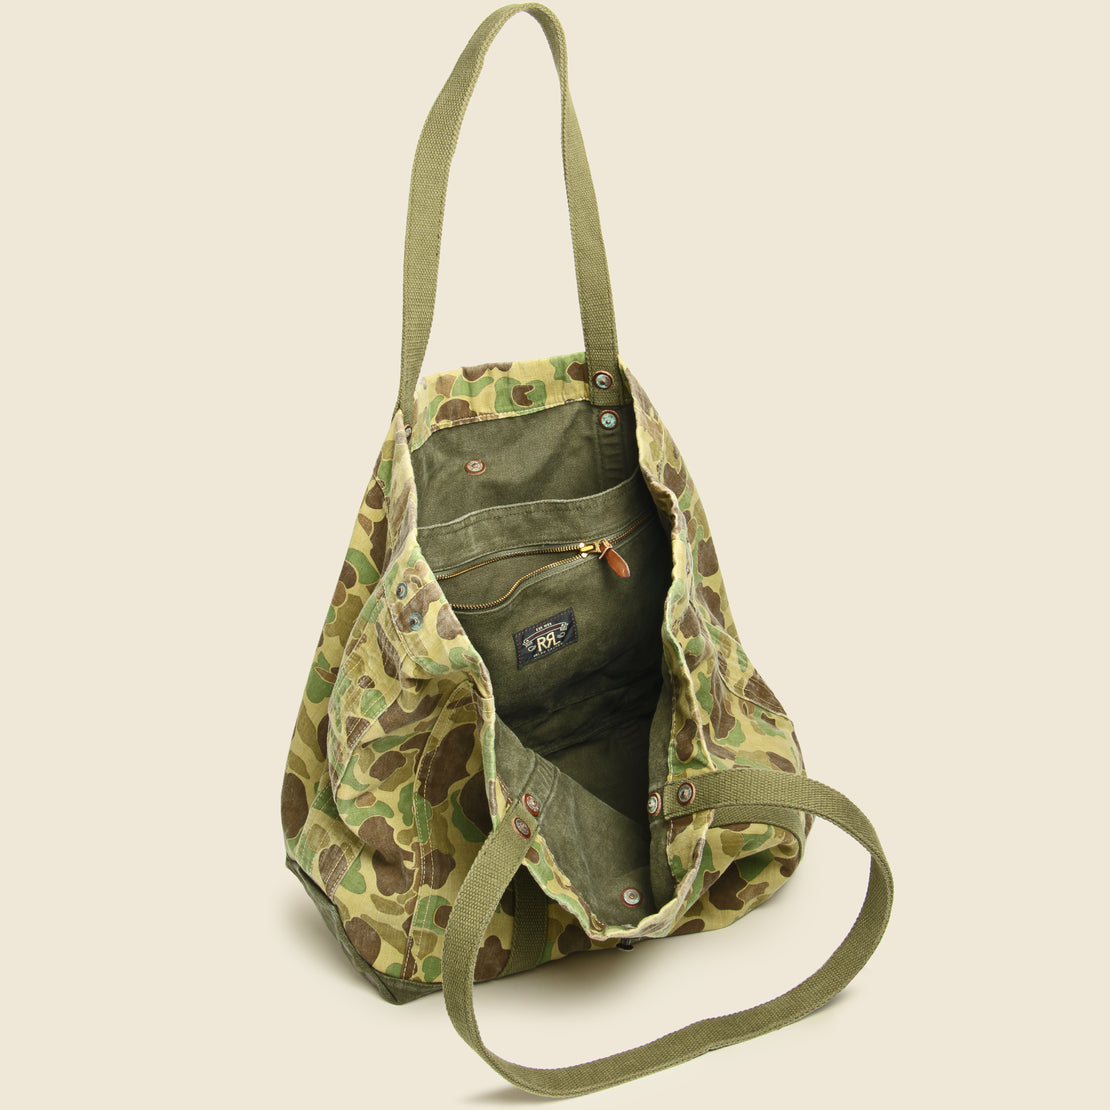 Camo Twill Tote - Olive Frog Skin - RRL - STAG Provisions - Accessories - Bags / Luggage